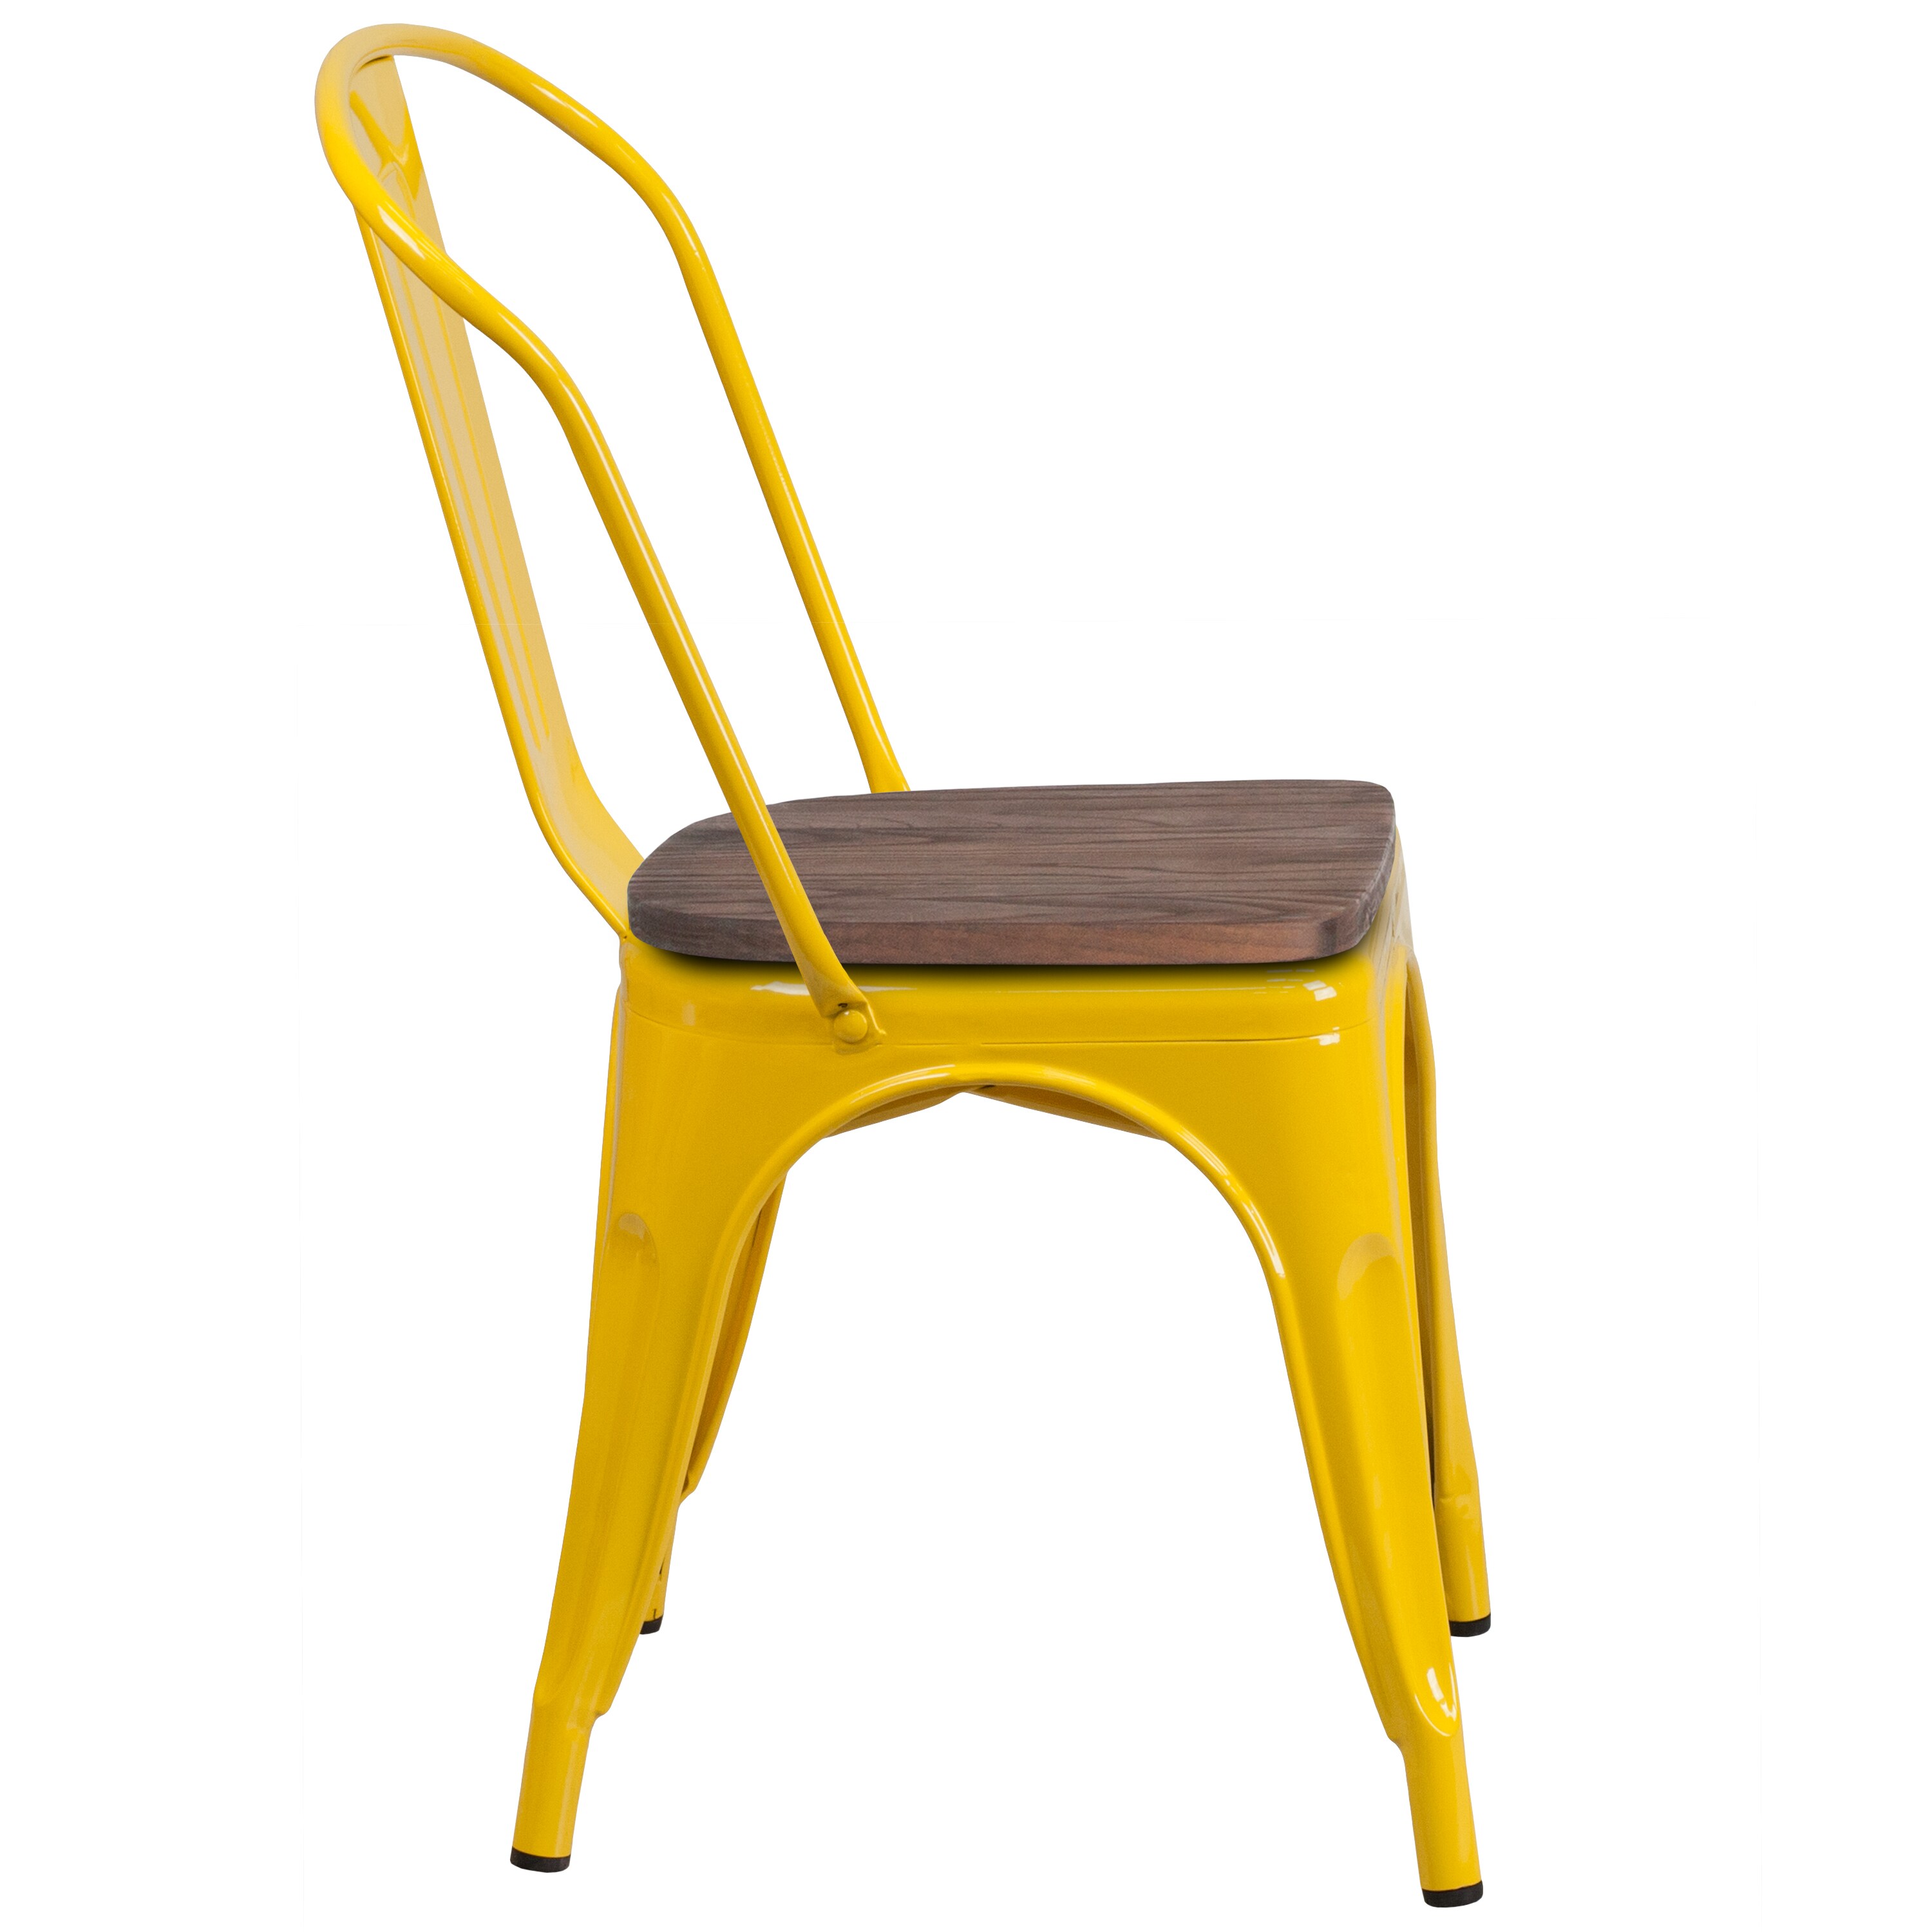 Flash Furniture Perry Rustic Walnut Wood Seat for Colorful Metal Chairs